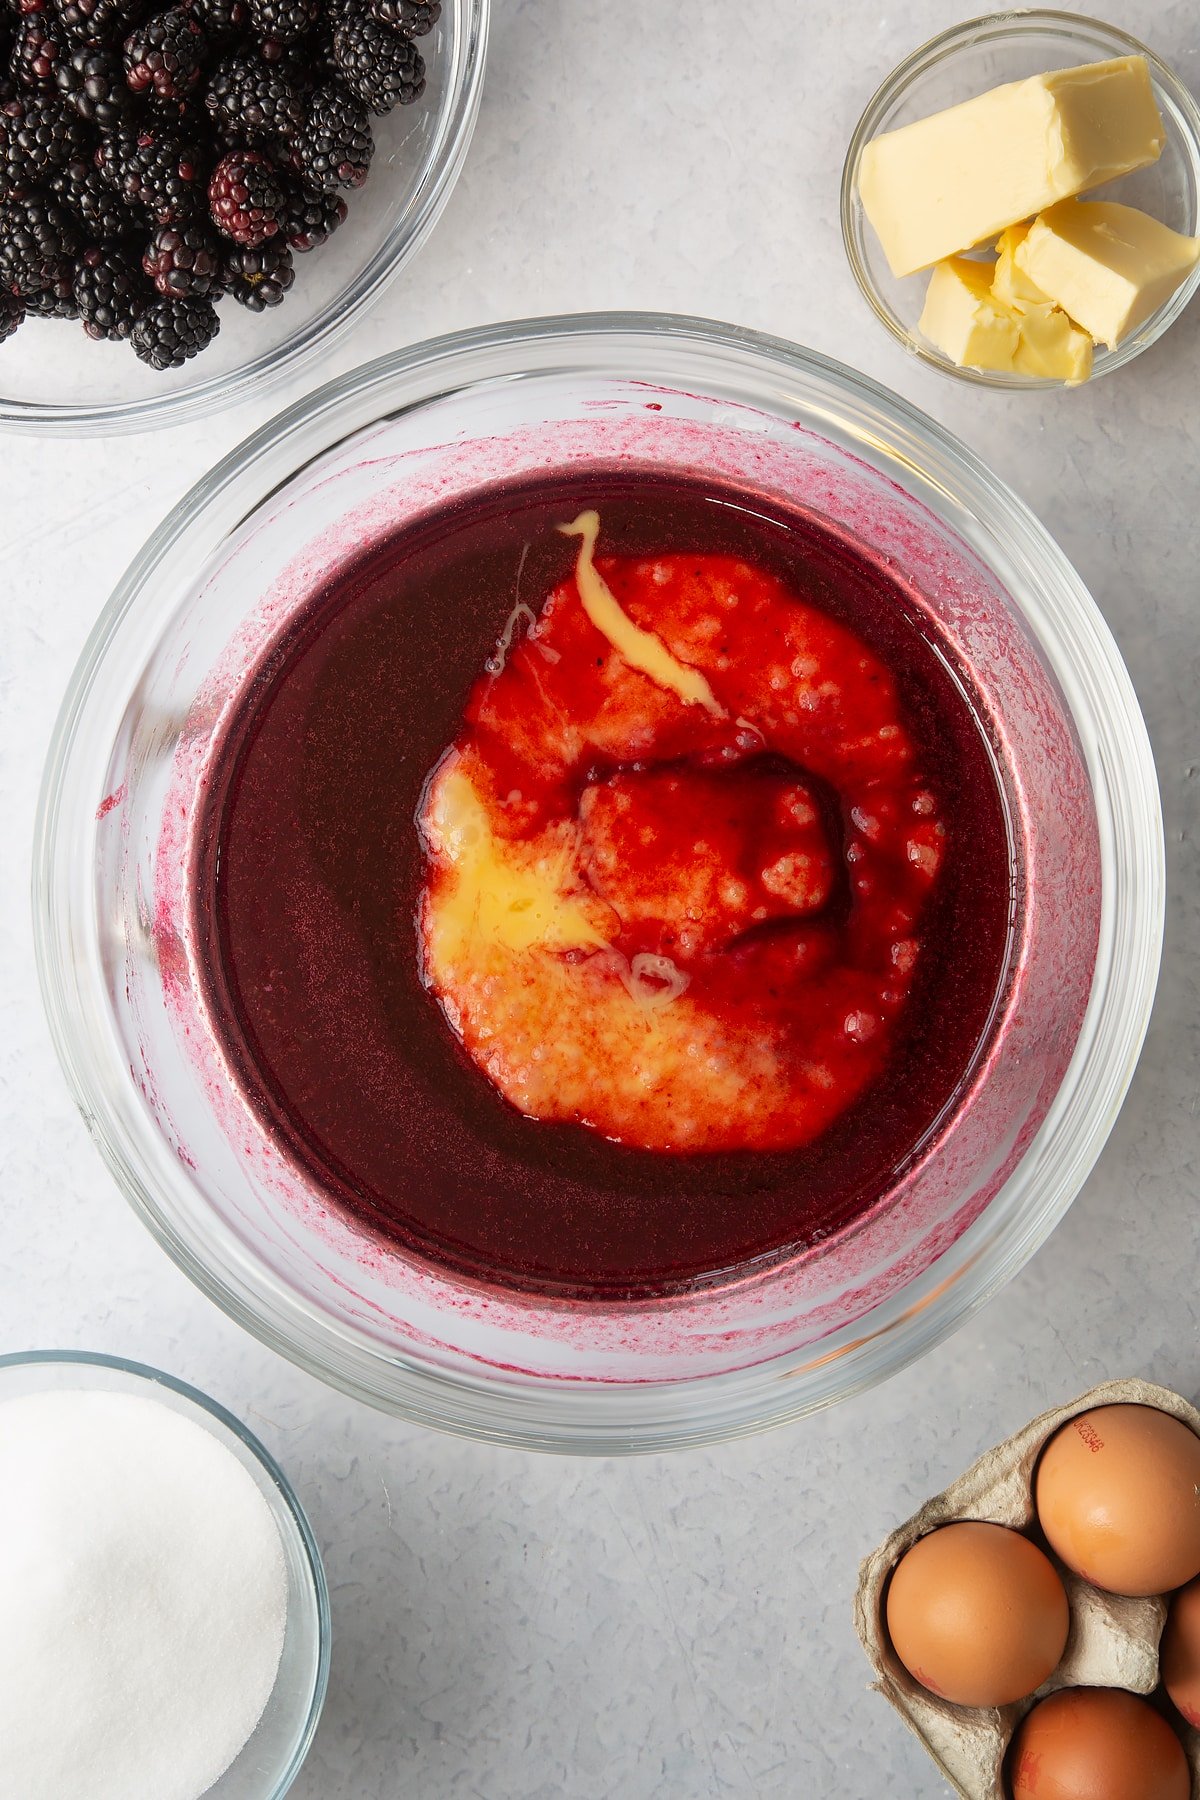 blackberry juice mixture topped with beaten eggs in a large clear bowl.